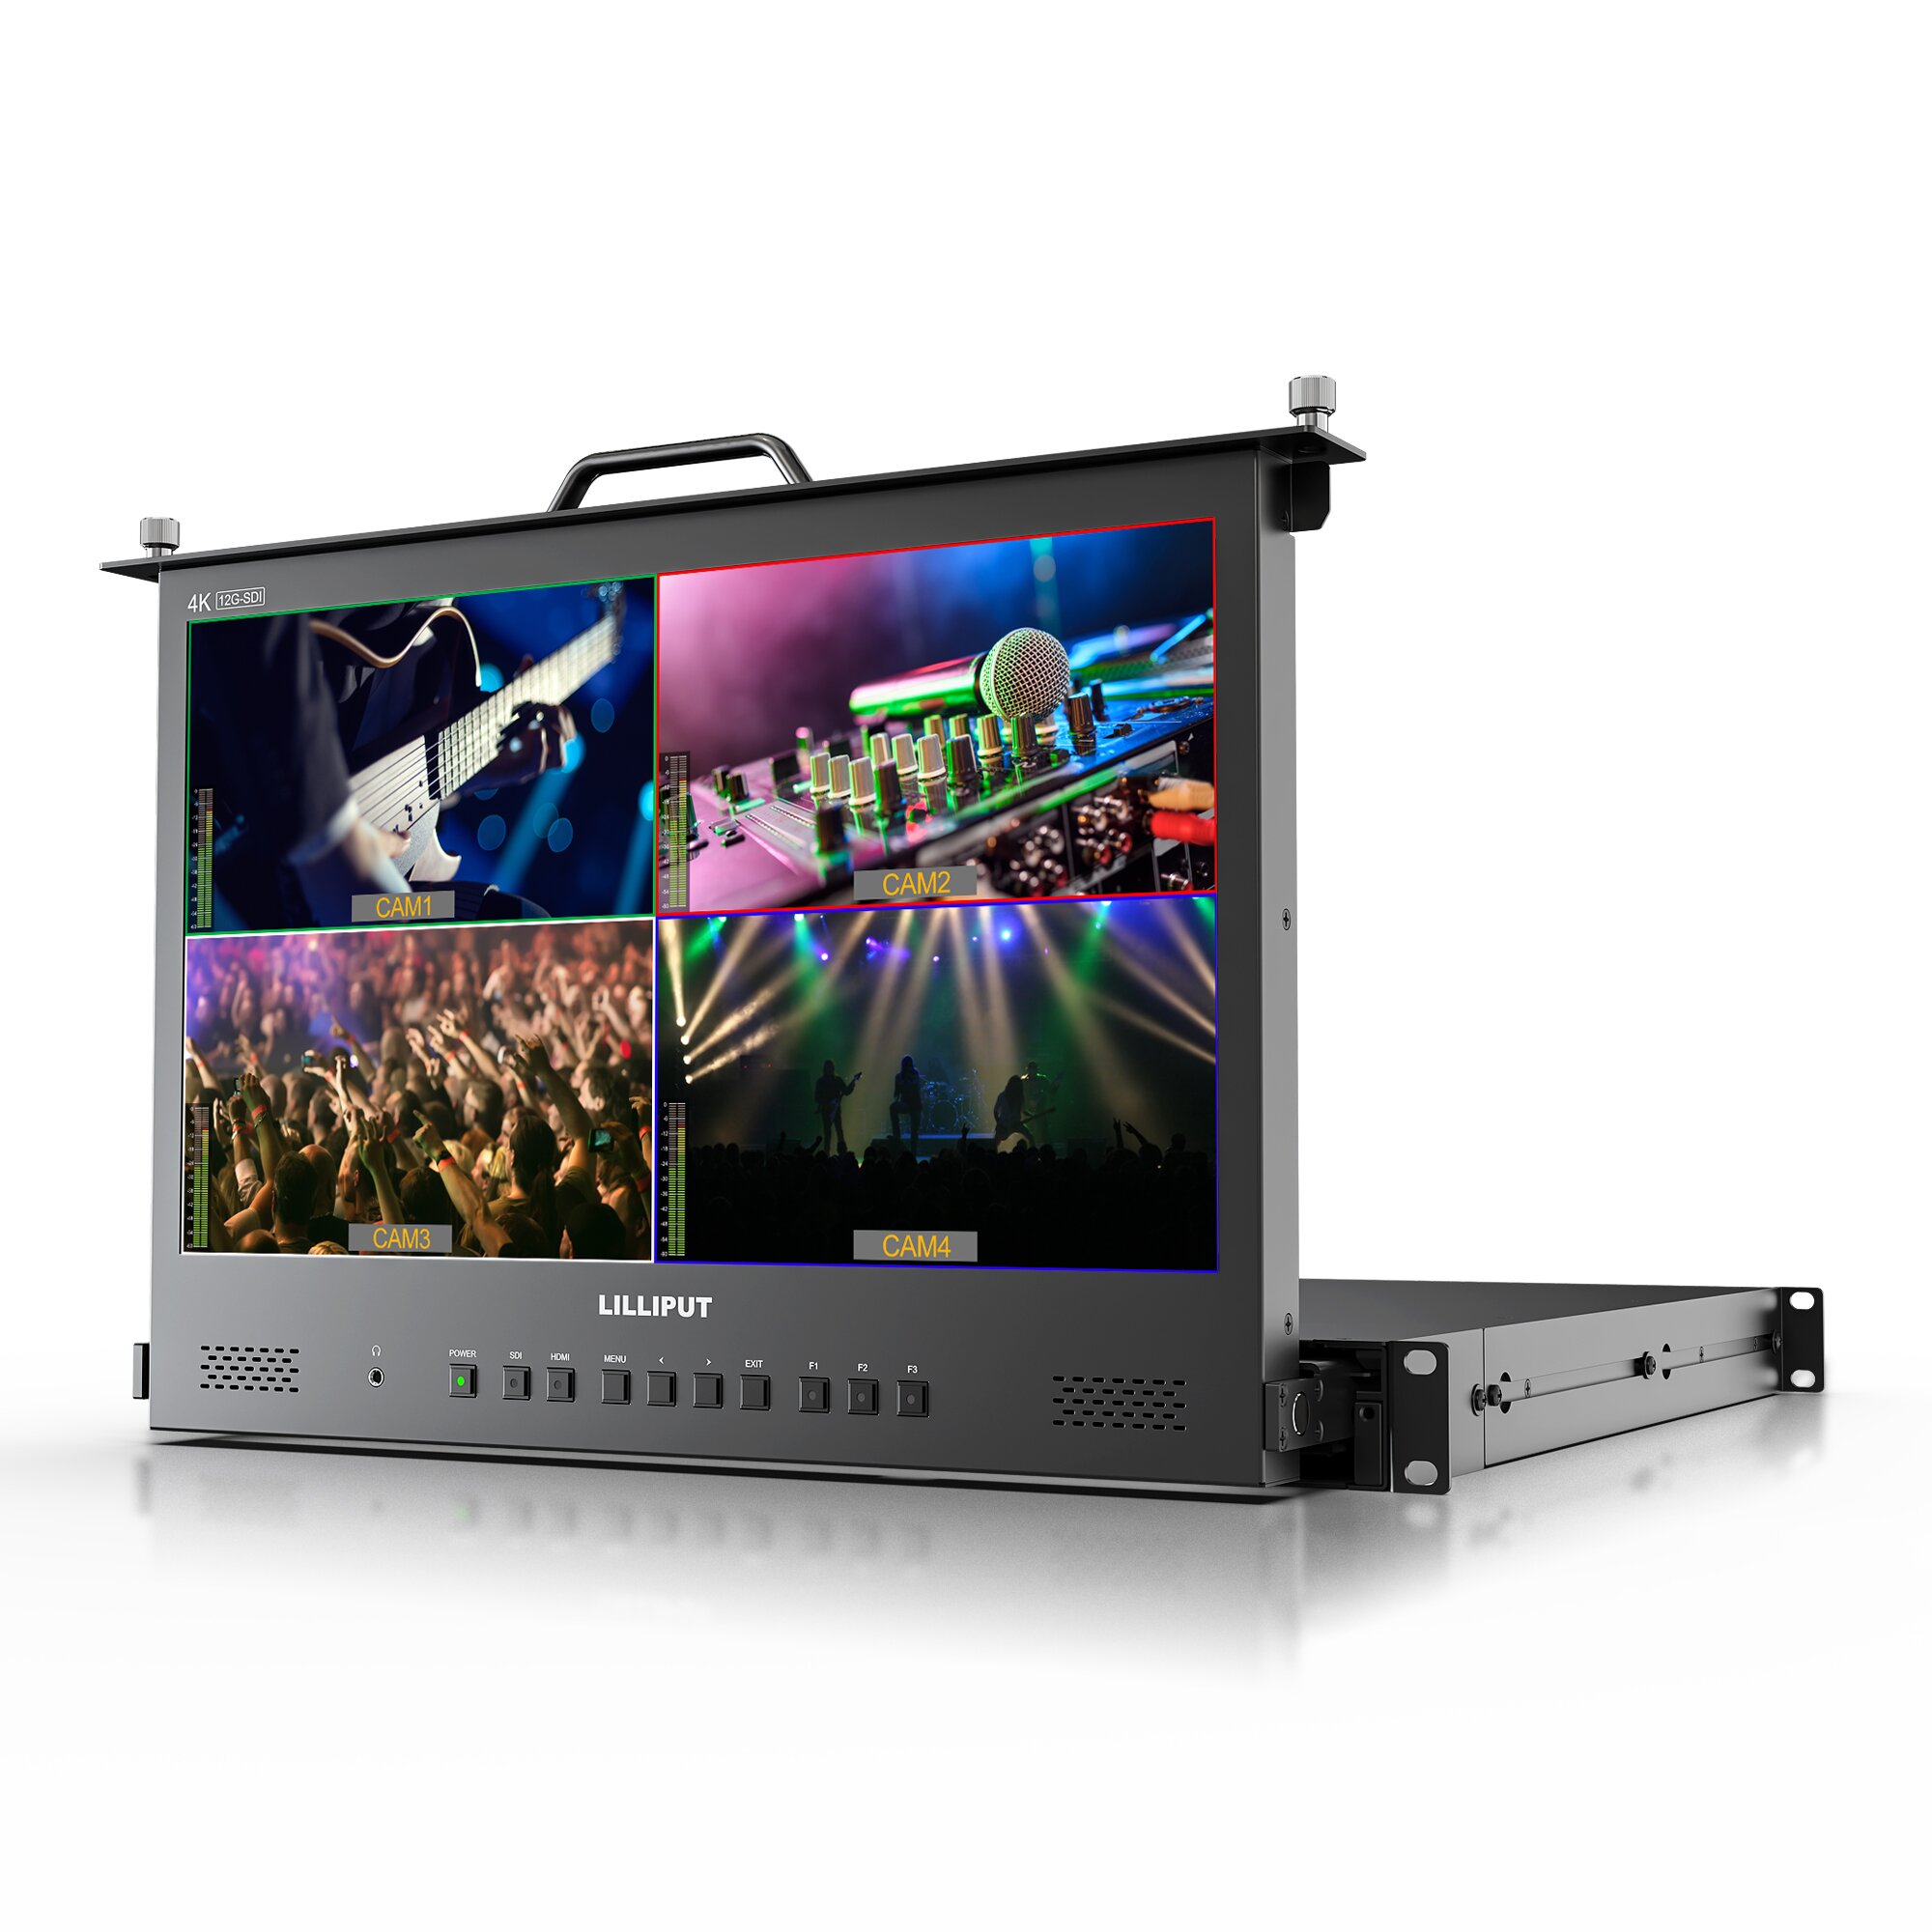 LILLIPUT 17.3 Inch 4×12G-SDI 1RU Pull-out Rackmount Monitor Featured Image